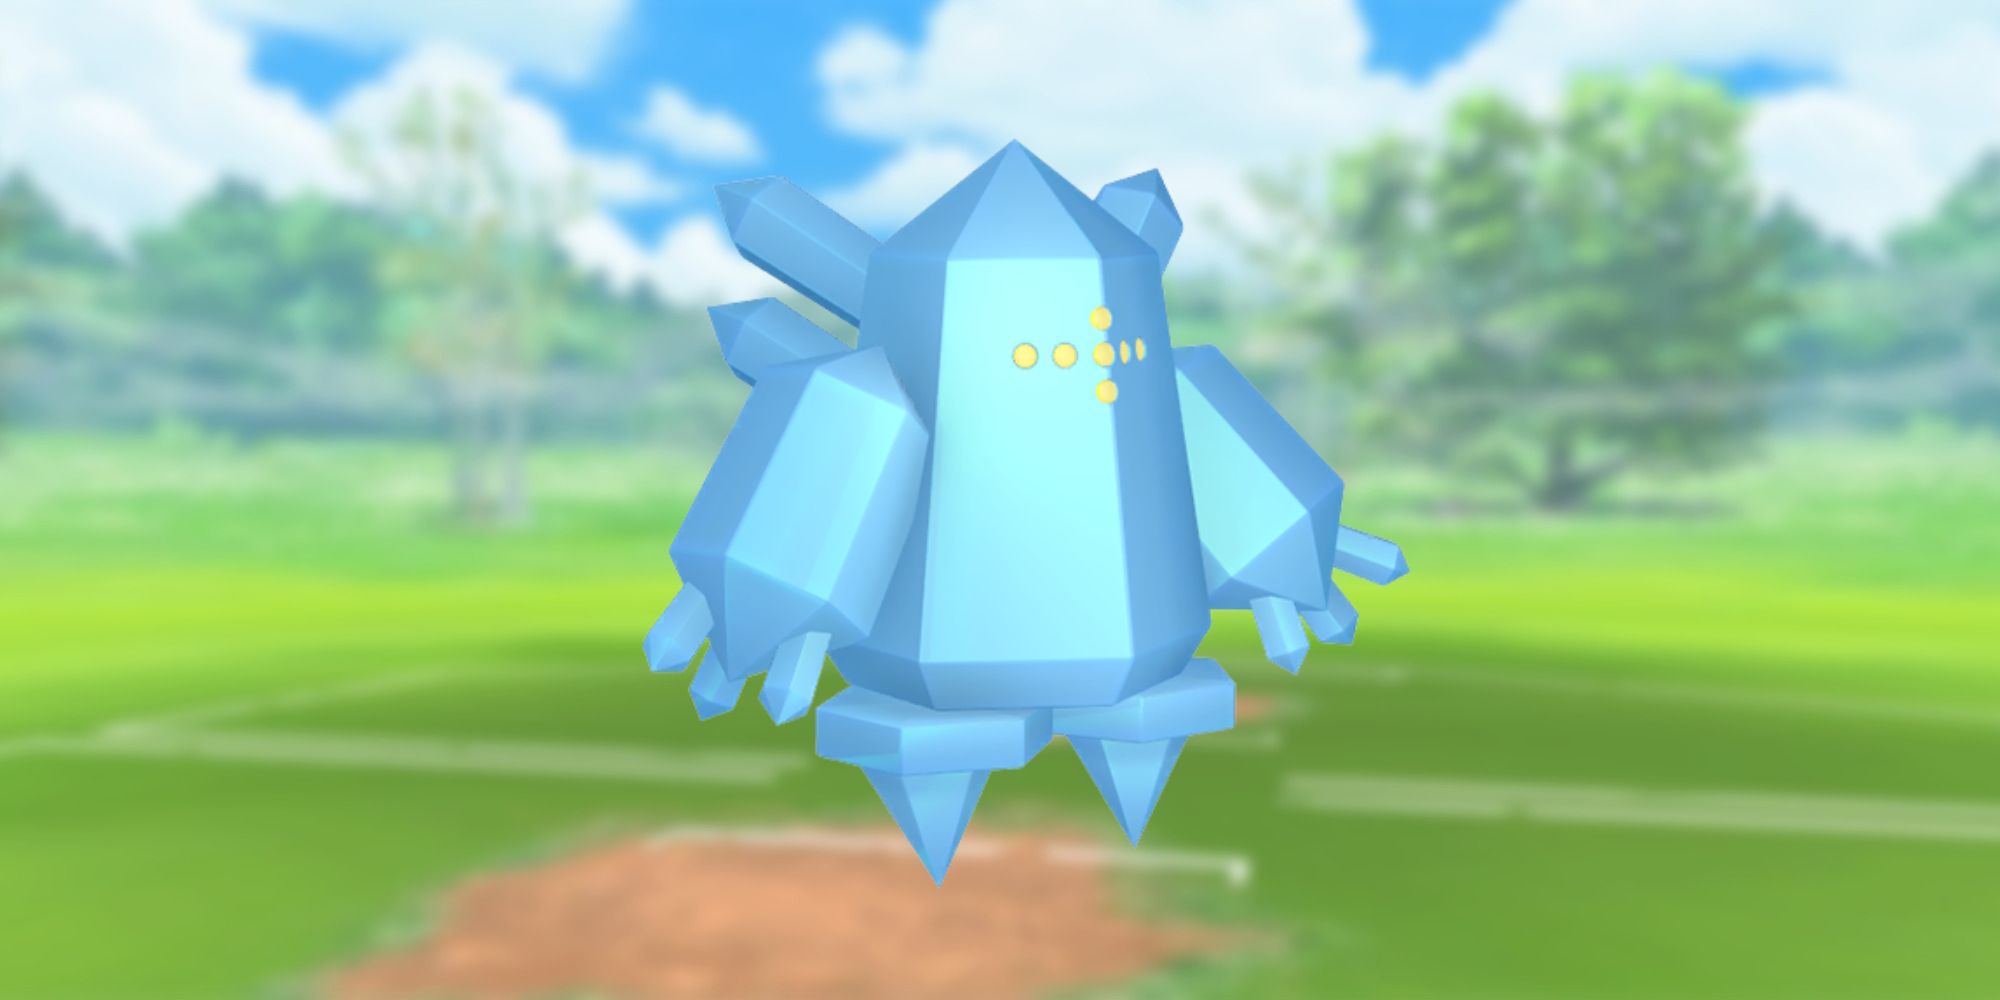 Regice from Pokemon with the Pokemon Go battlefield as the background